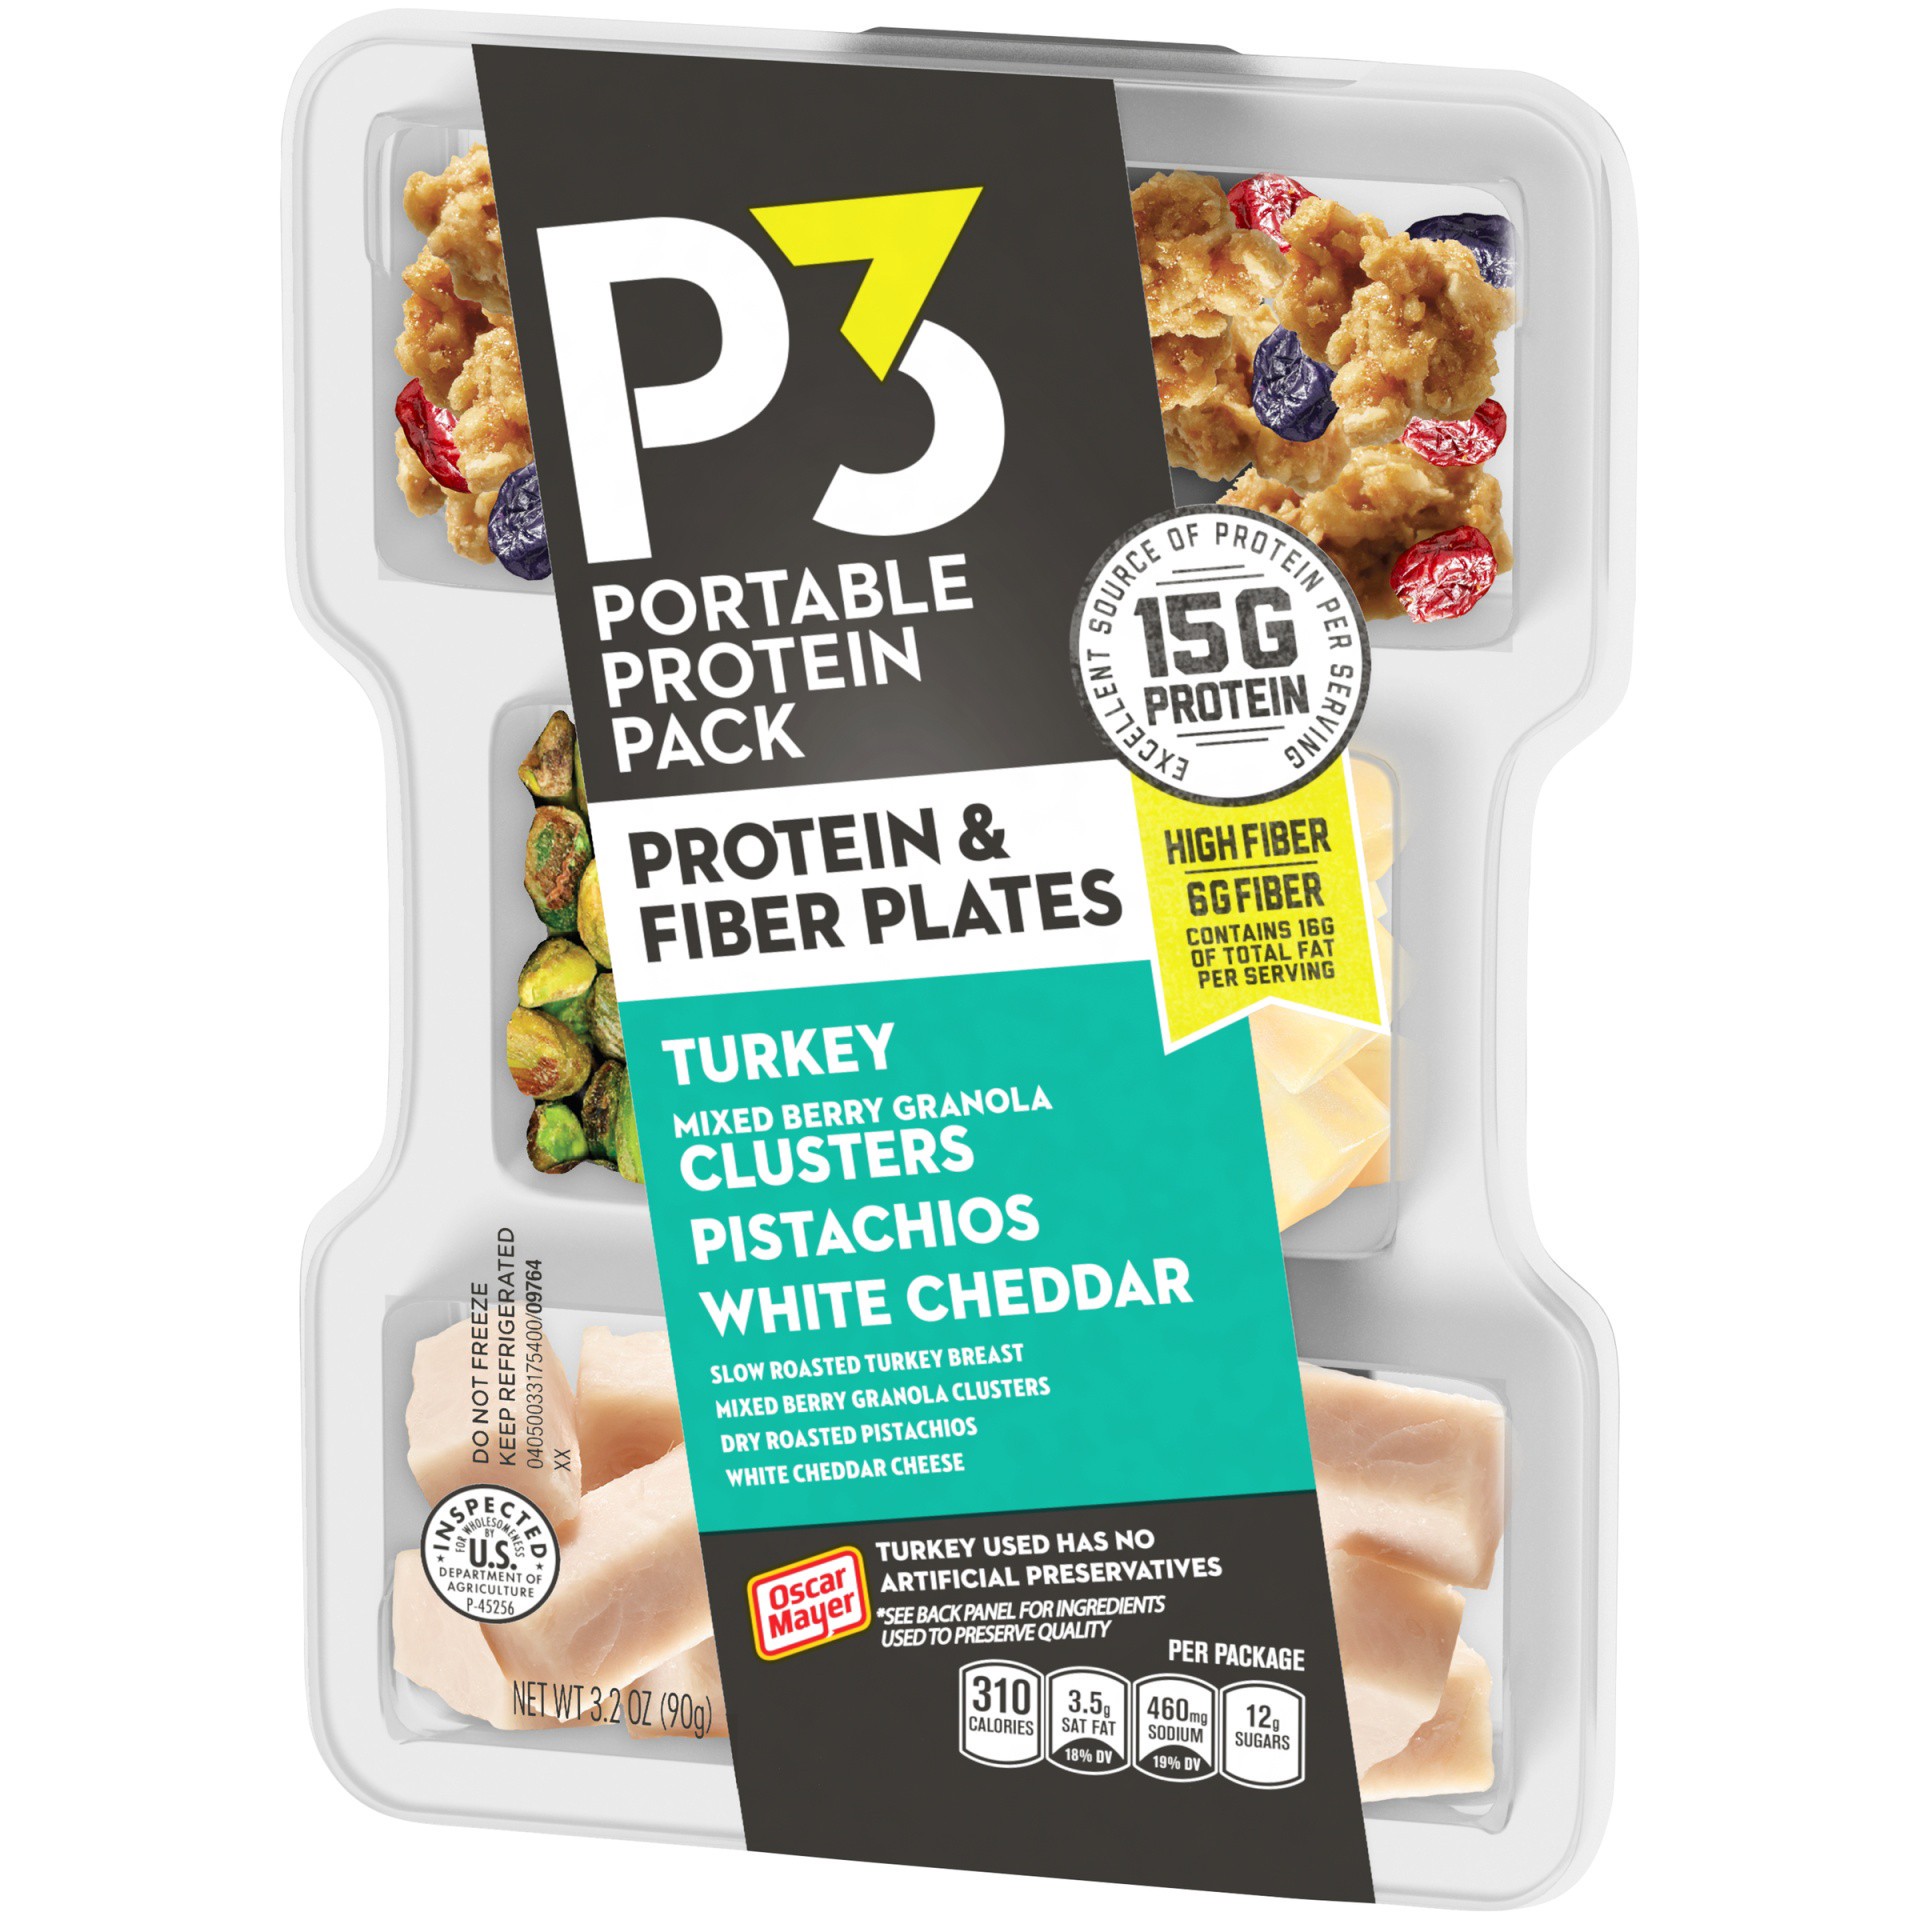 slide 3 of 6, P3 Portable Protein Snack Pack & Fiber Plate with Turkey, Mixed Berry Granola Clusters, Pistachios & White Cheddar Cheese Tray, 3.2 oz